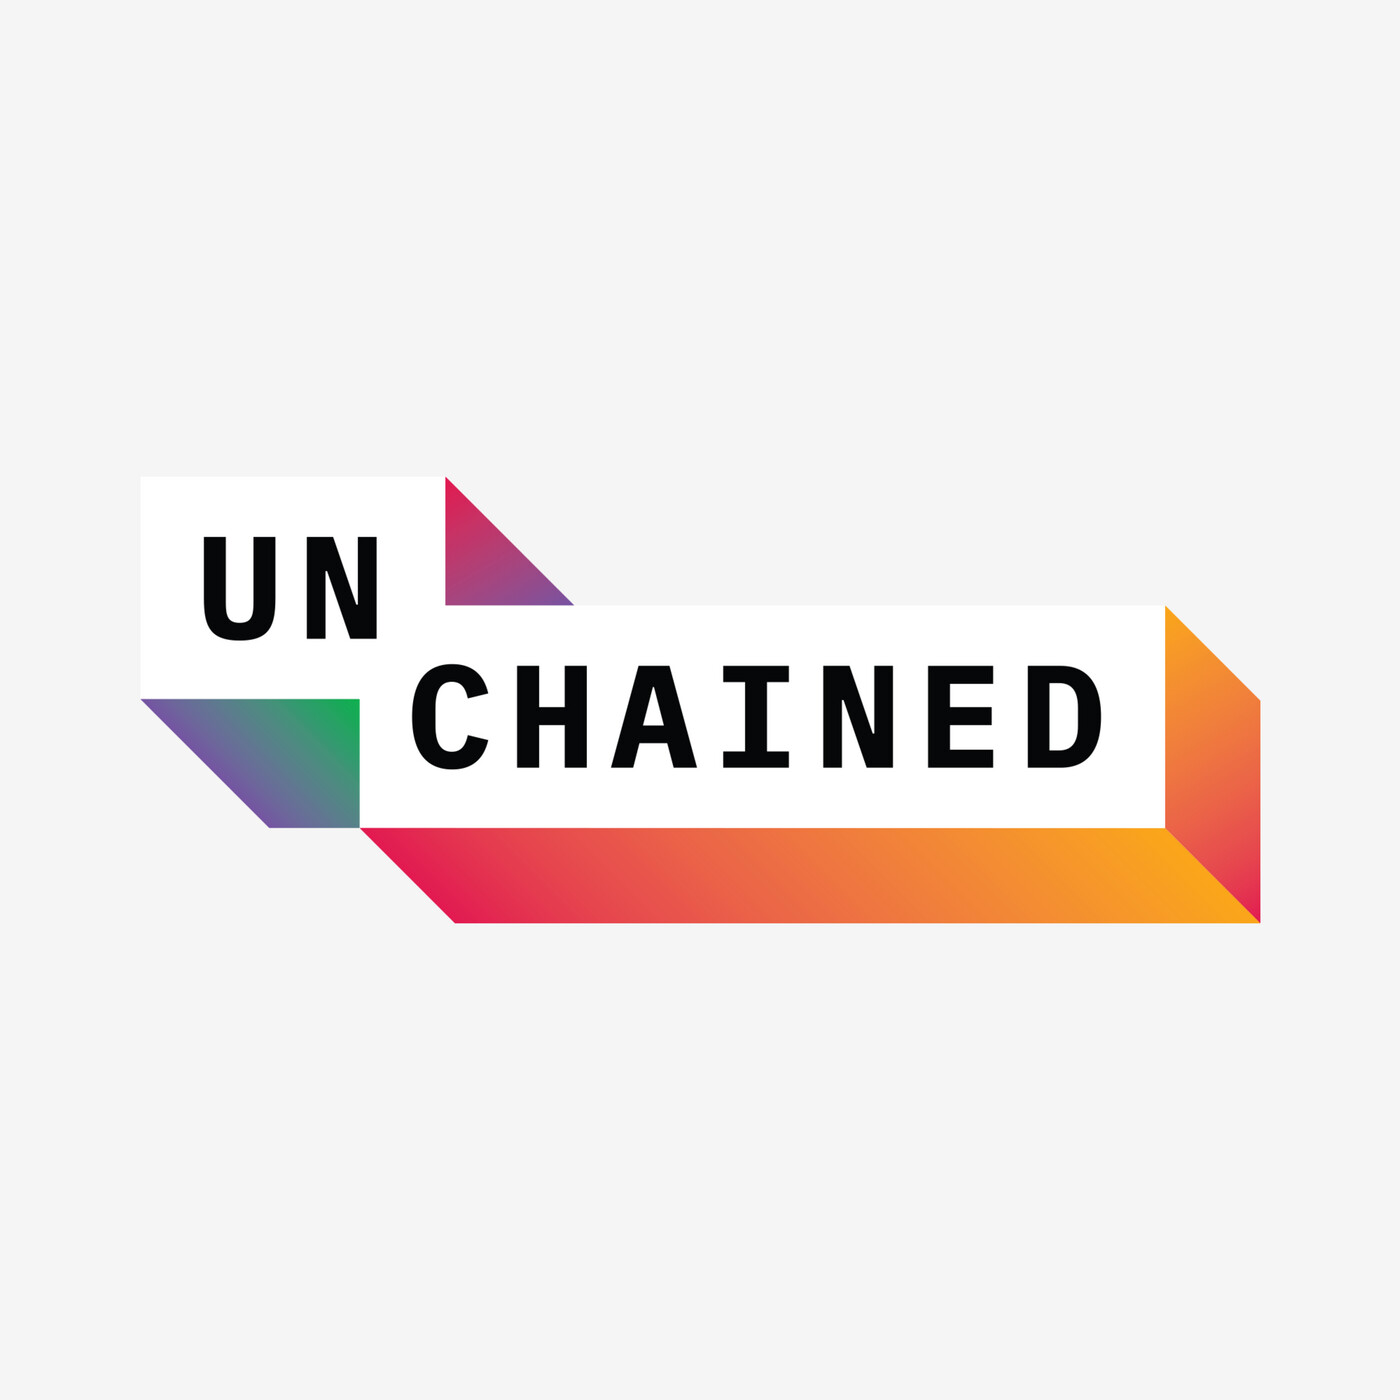 UNCHAINED: Bitcoin Layer 2s Aim to Attract Ethereum-Like Dapps. Will They Succeed?